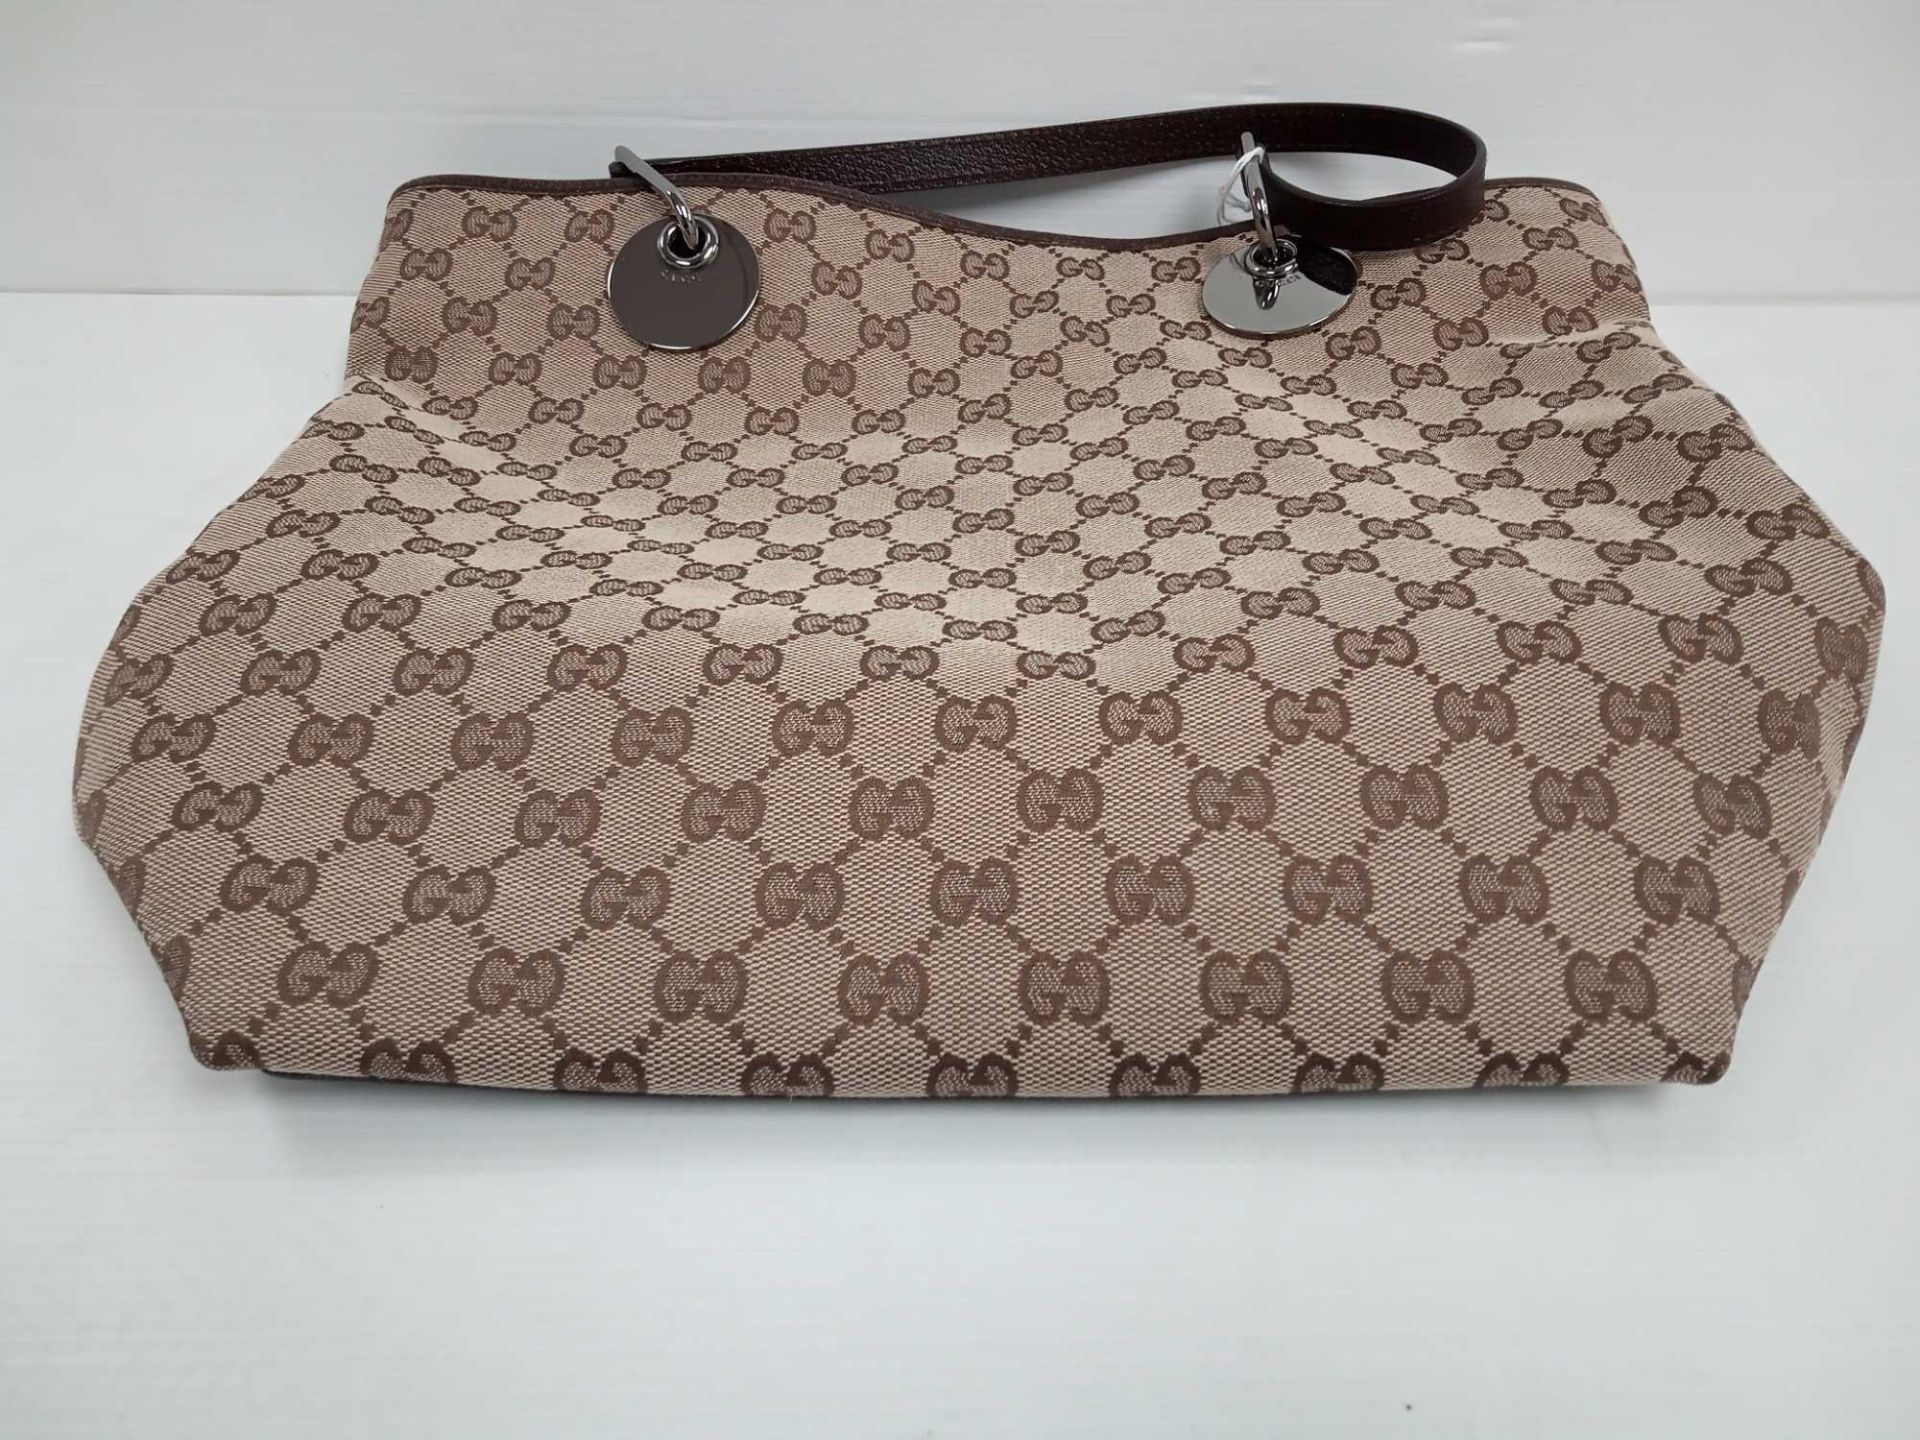 RRP 1550 Gucci Eclipse Tall Tote Beige/Dark Brown Shoulder Bag (Aao5624) Grade A (Appraisals - Image 2 of 2